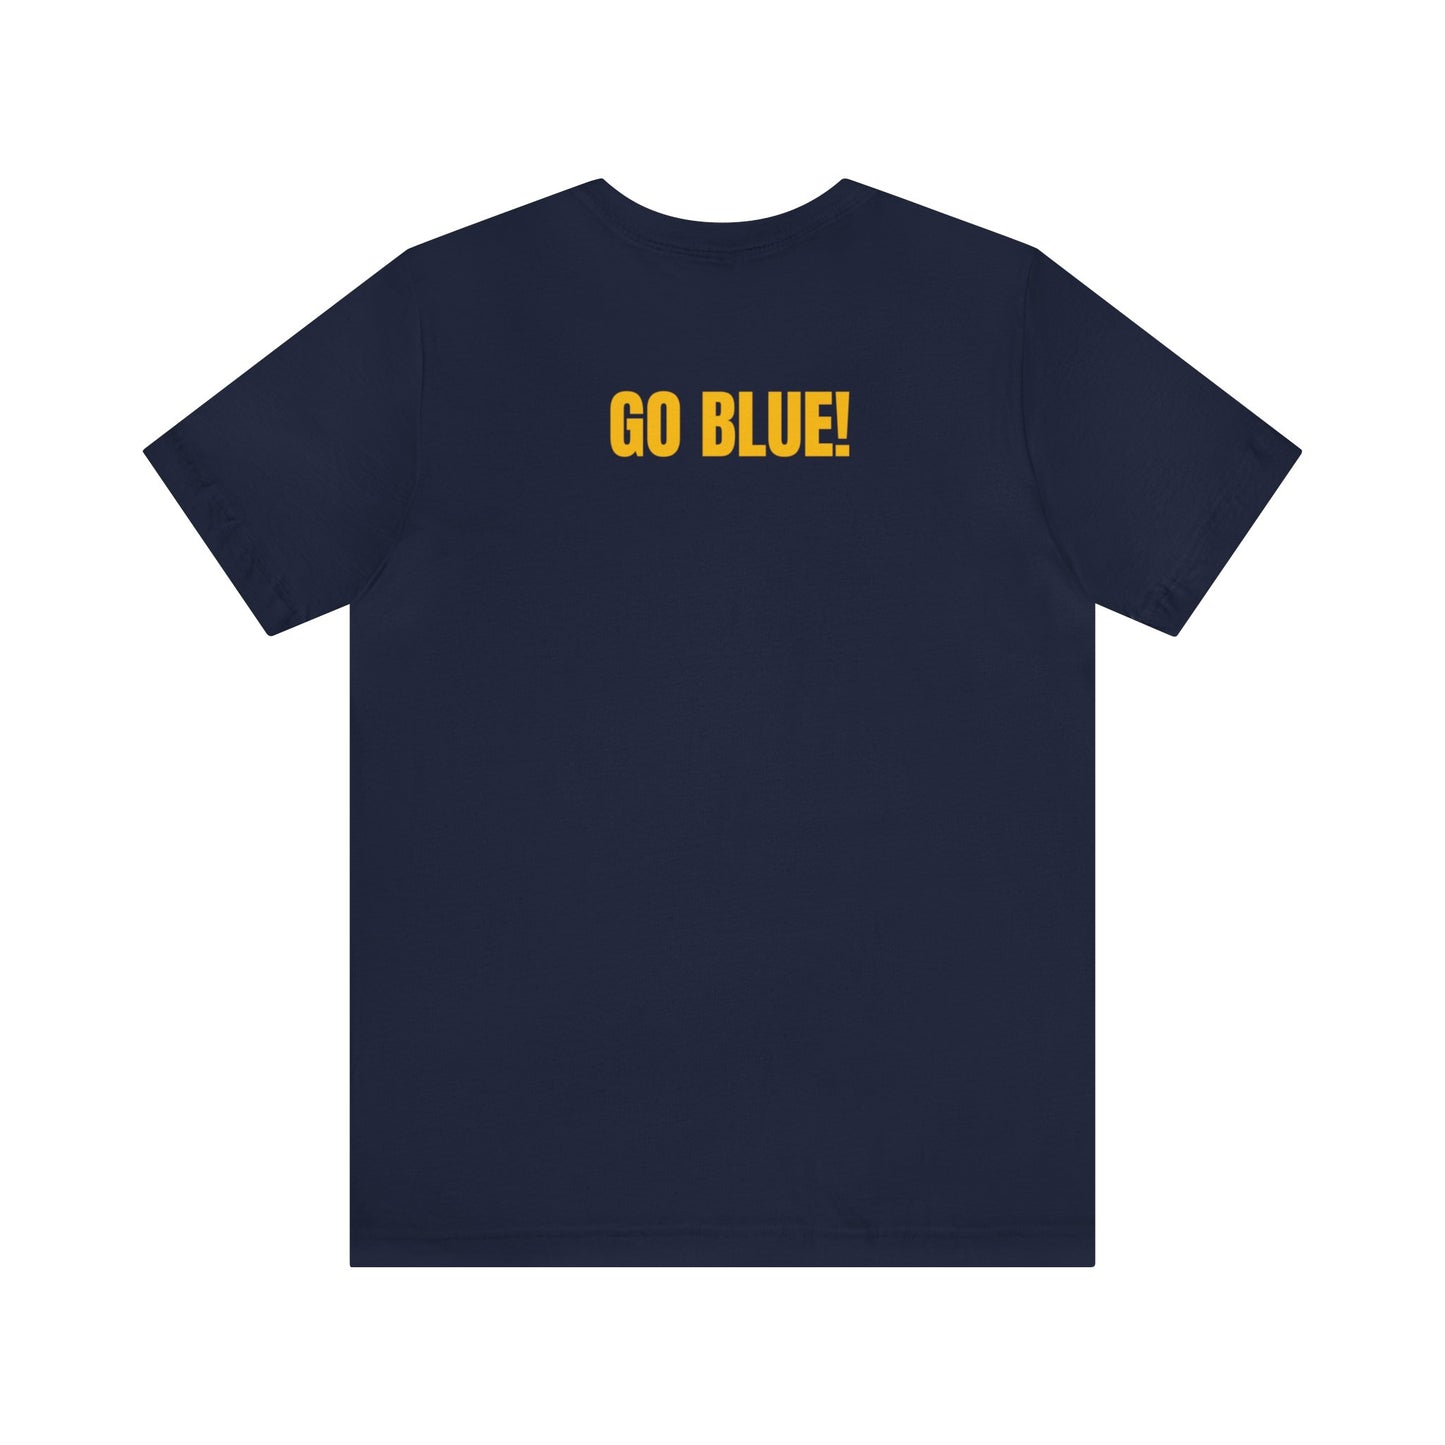 Michigan vs Everybody - Approved Classic Unisex Tee: Embrace Wolverines Pride!